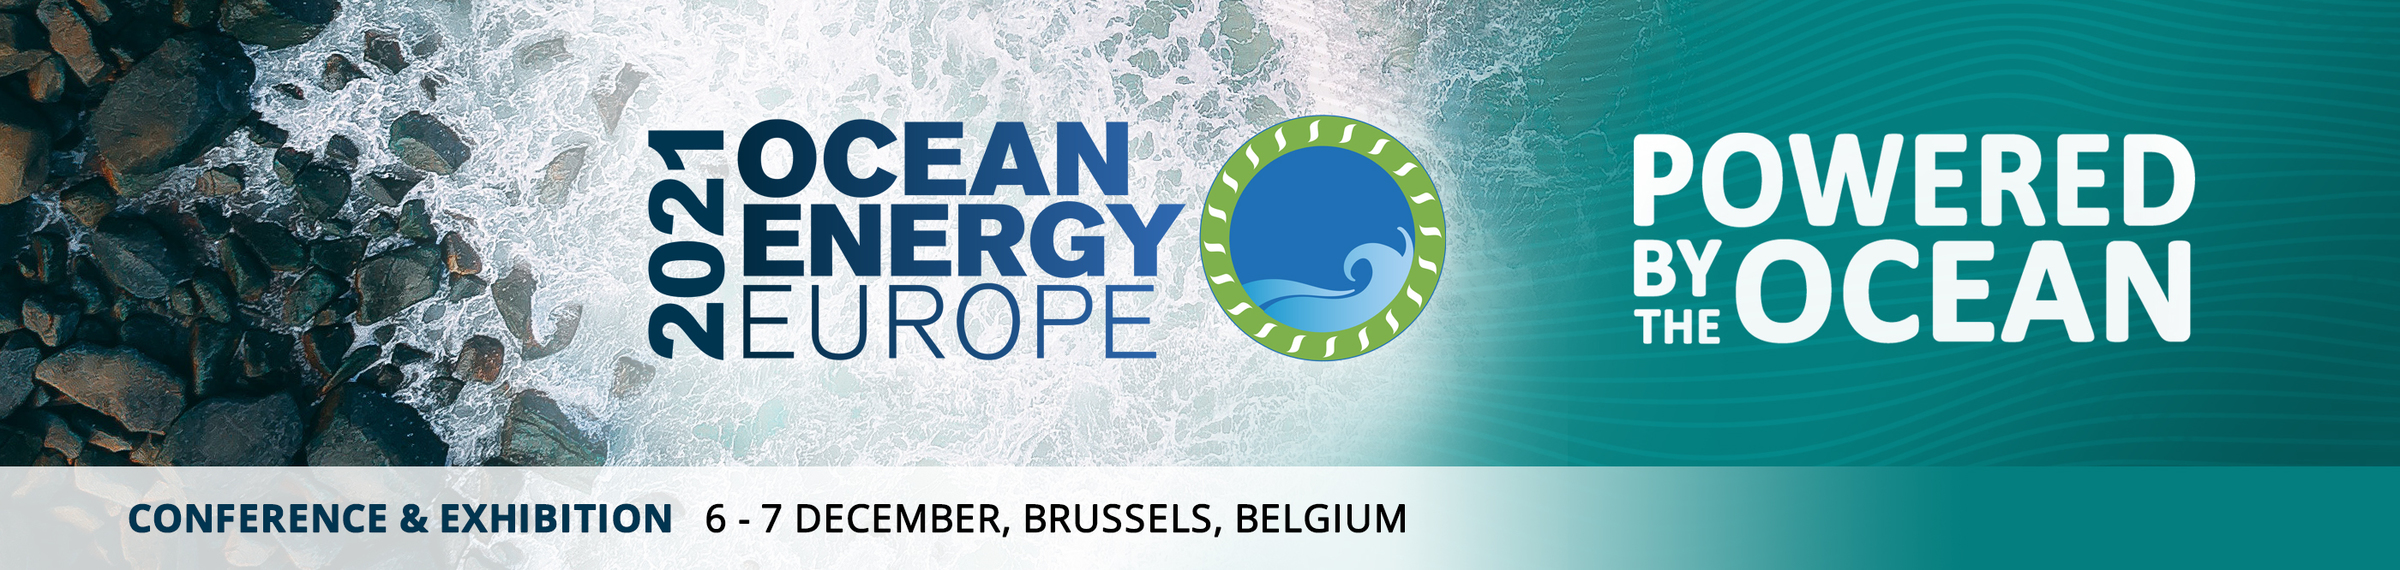 Ocean Energy Europe 2021 Conference & Exhibition